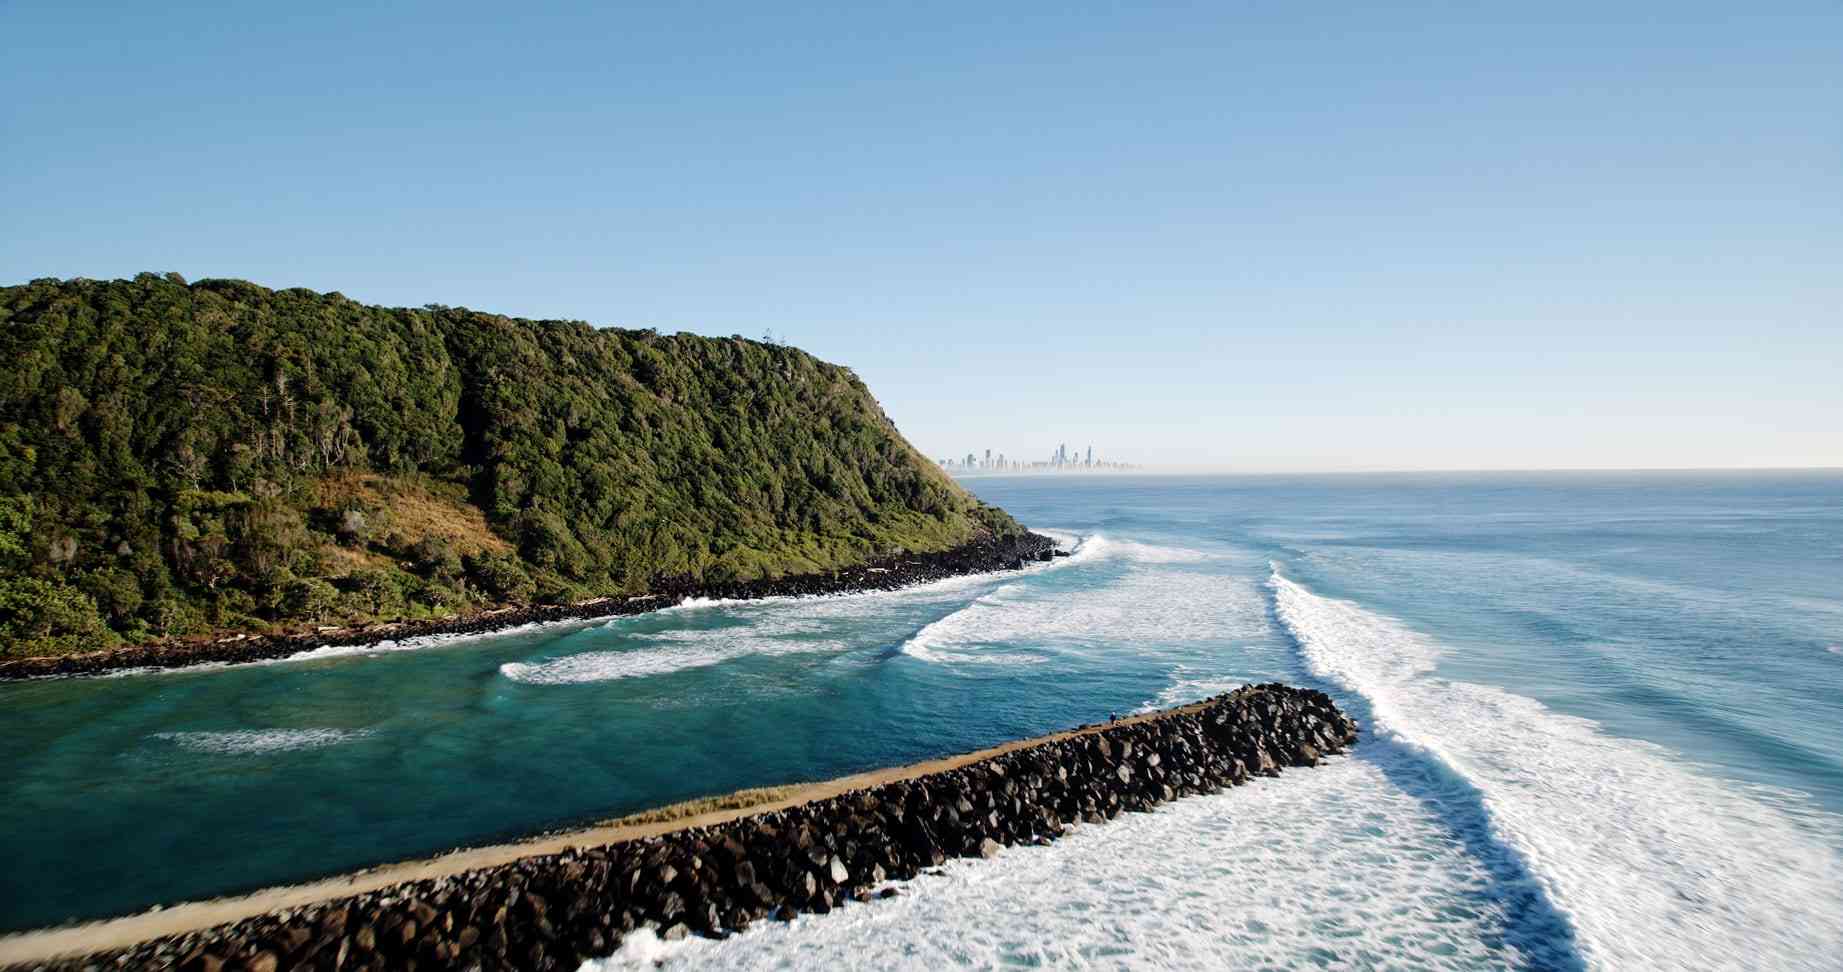 TOP 5 FISHING SPOTS ON THE GOLD COAST